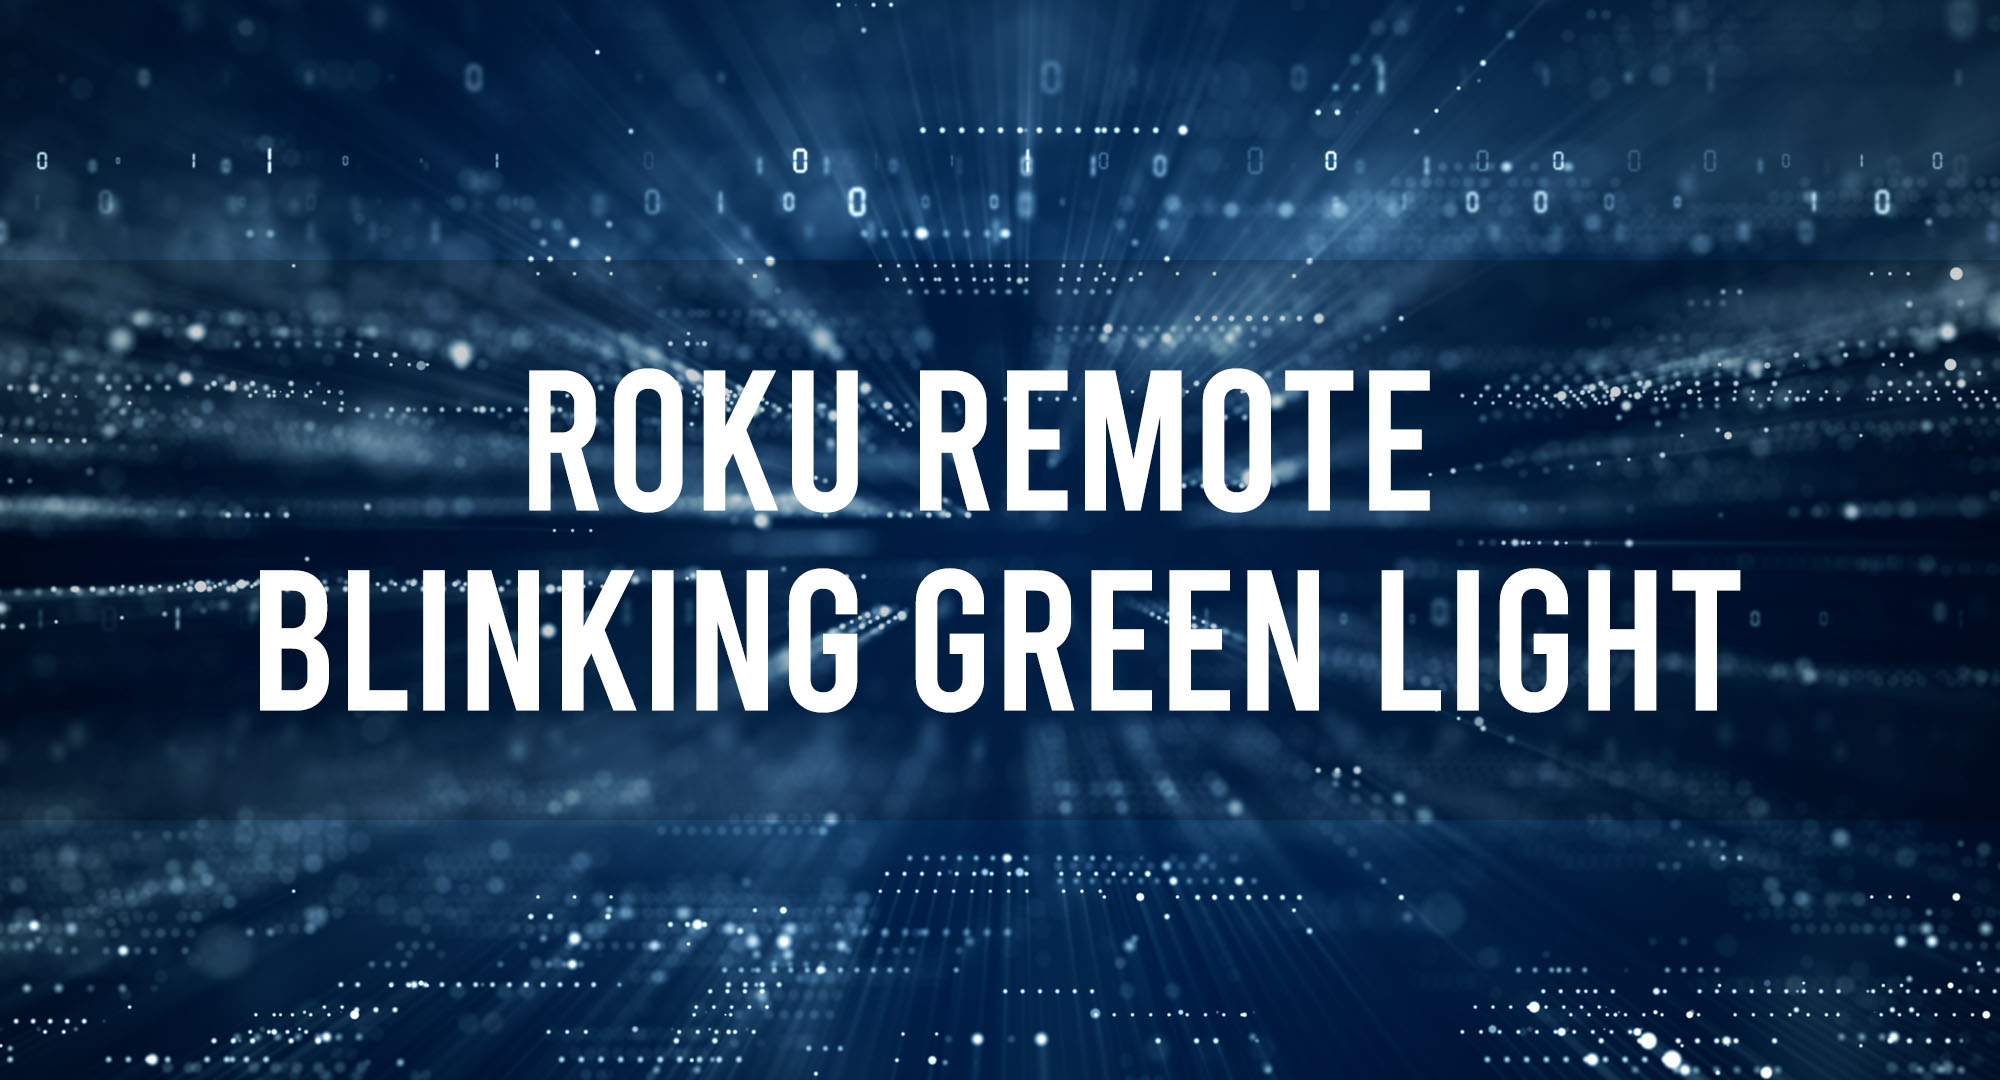 Roku Remote and Blinking Green Light